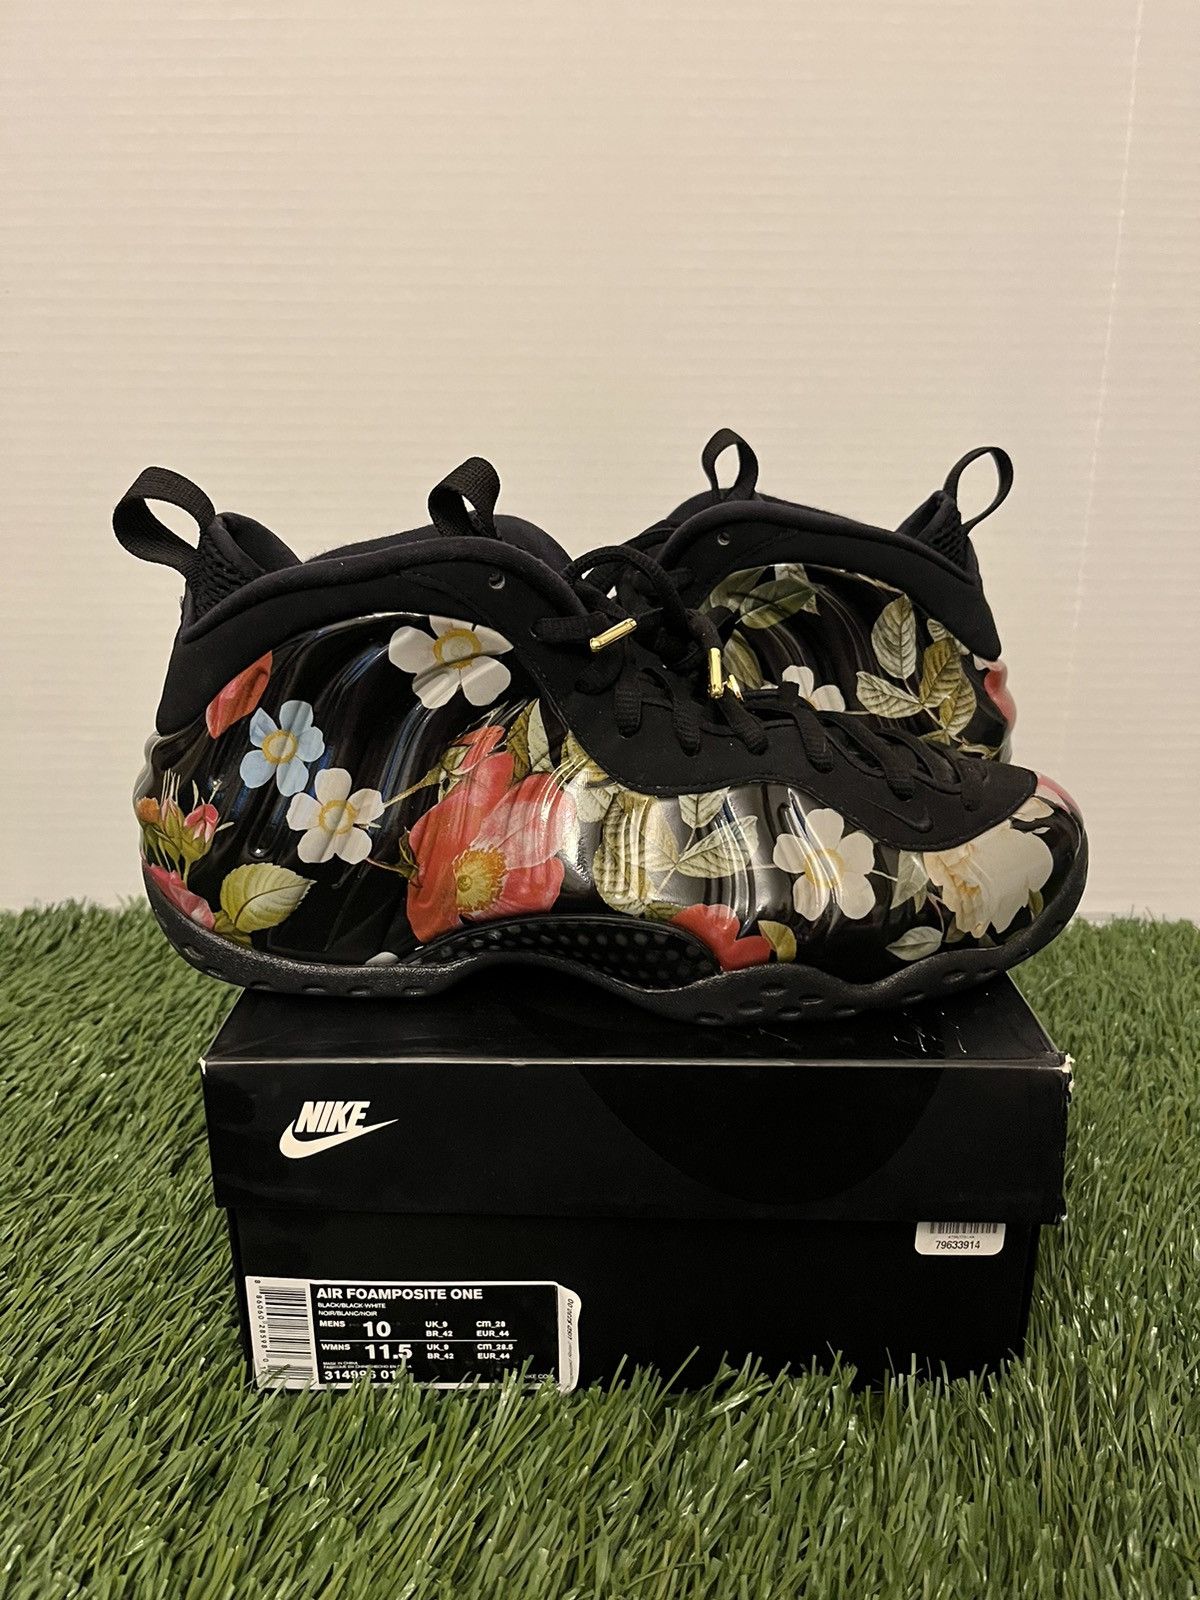 Nike Nike Air Foamposite One ‘Floral’ Size 10 Size US 10 / EU 43 - 1 Preview